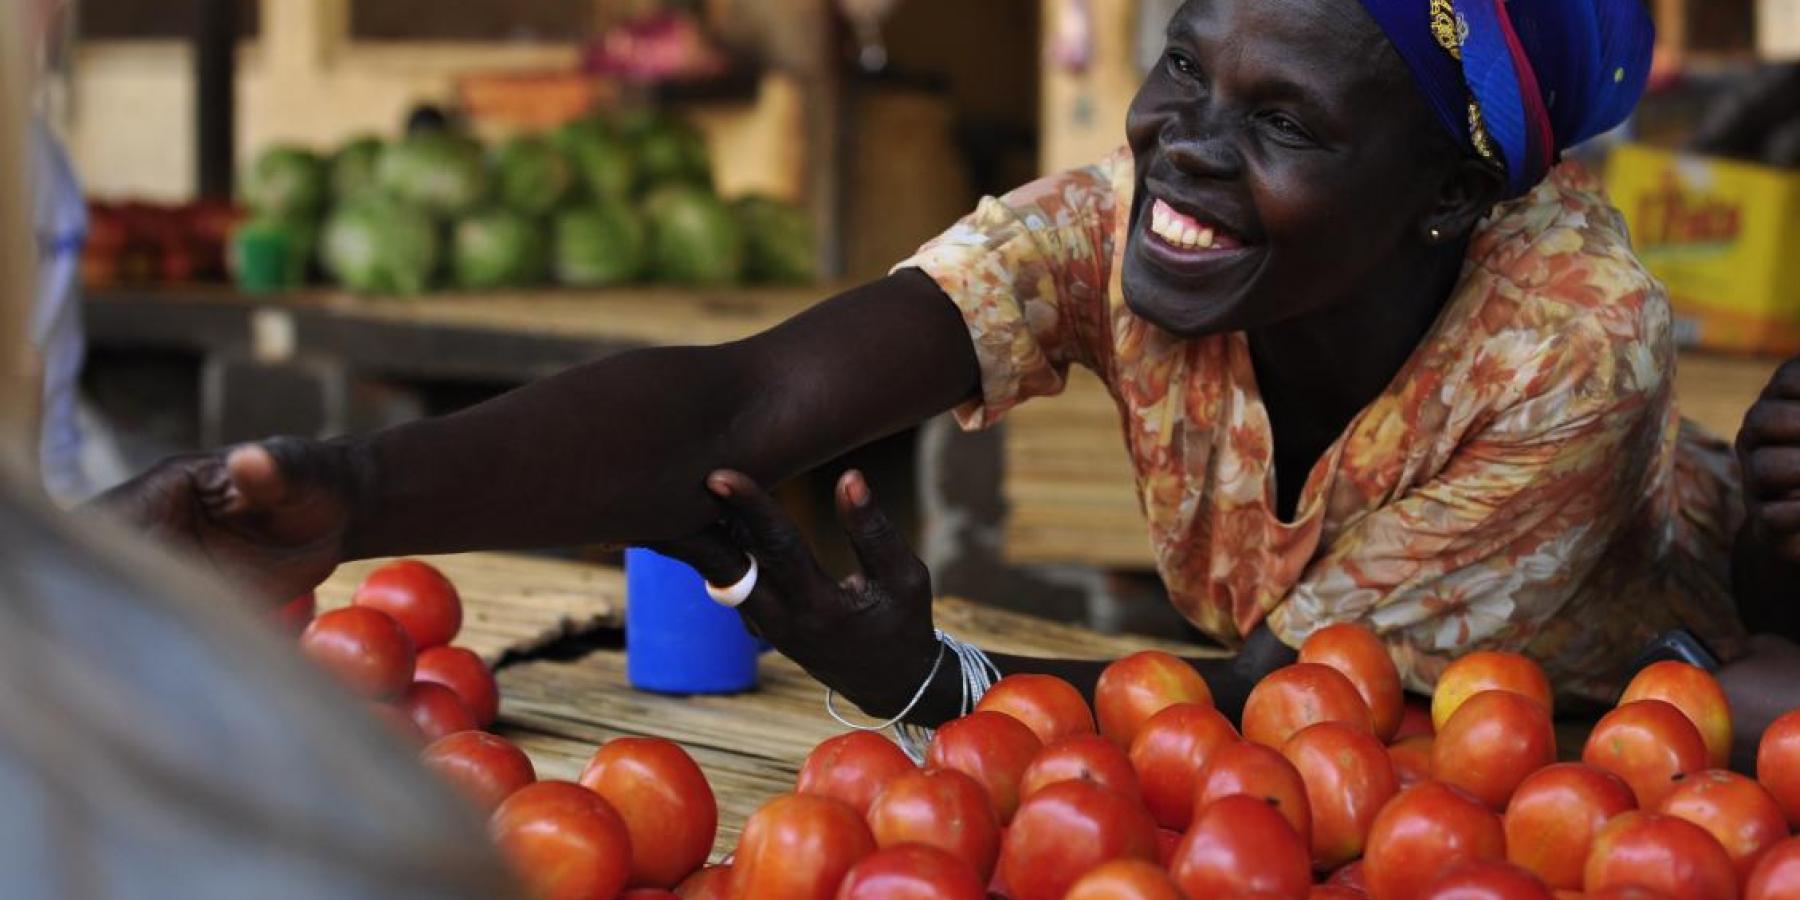 A member of a women's microfinance group sells produce at a market in Gulu, Uganda. 